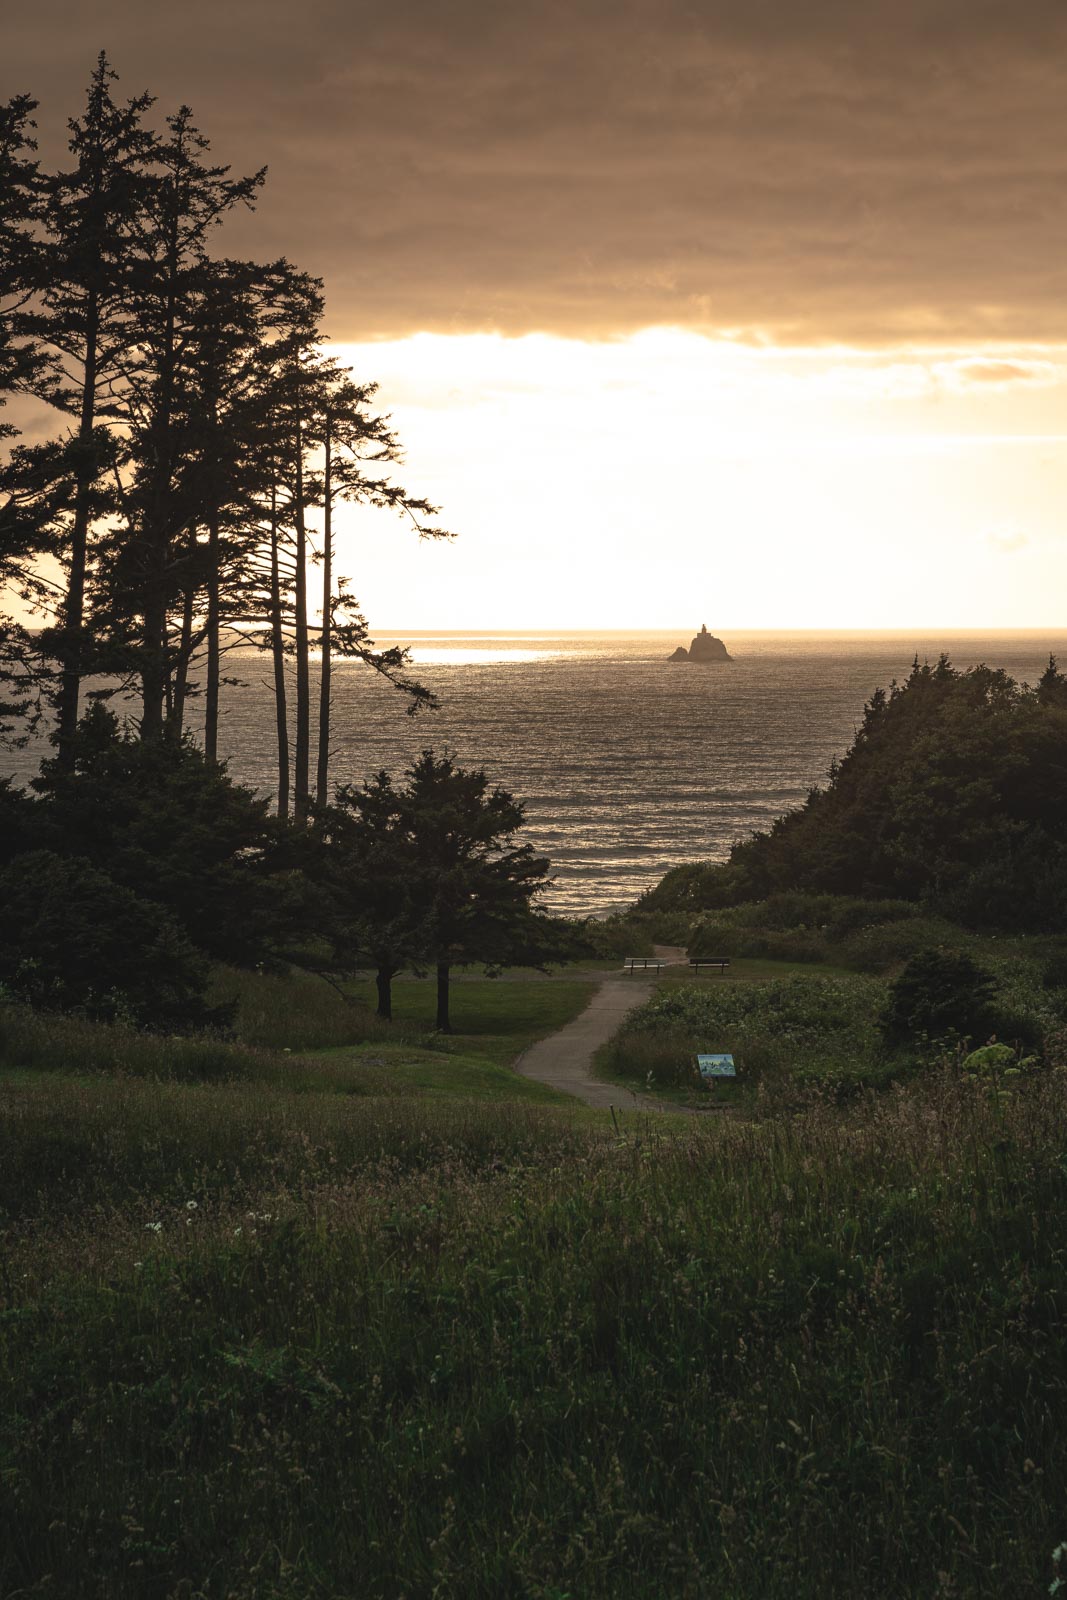 Ecola State Park Trail leading to Tillamook lighthouse in the distance in the ocean.